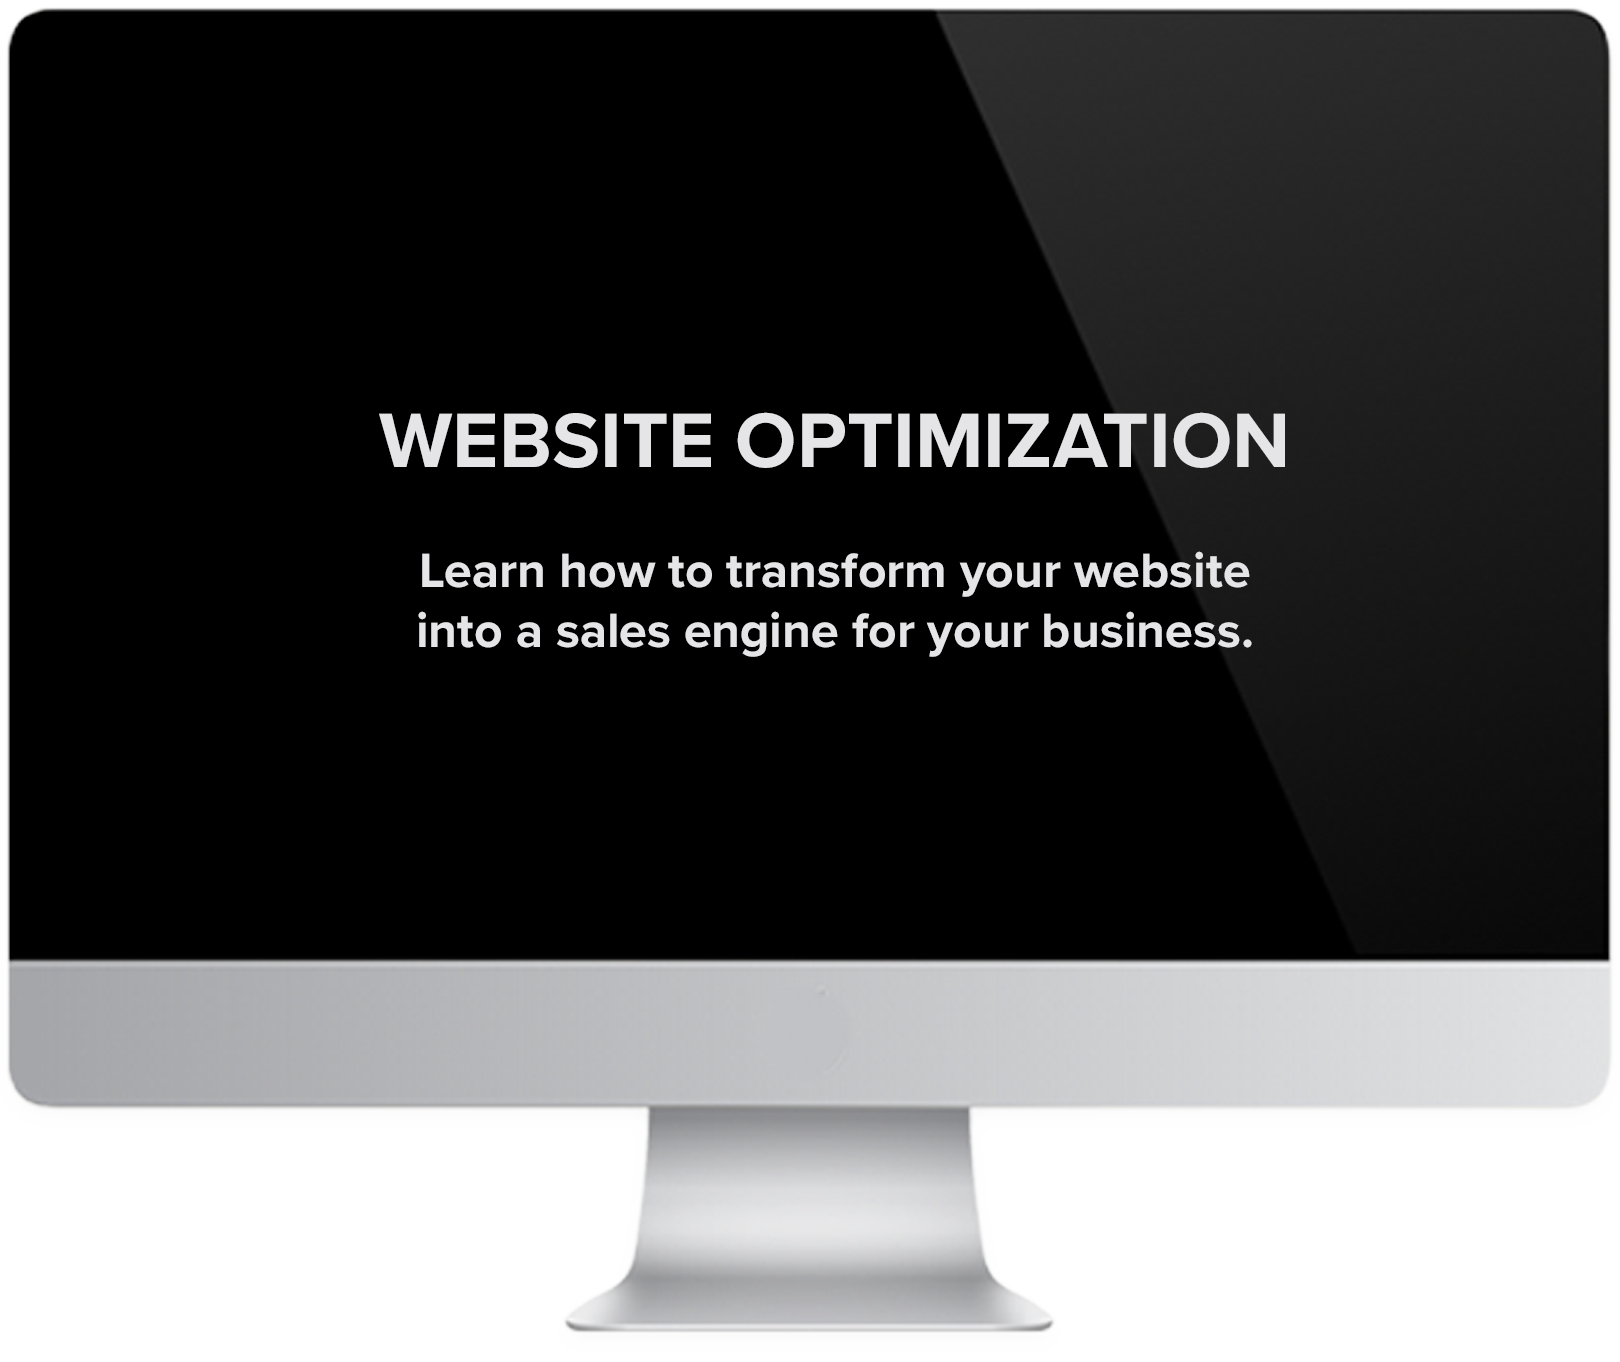 Website Optimization training to learn how to transform your website into a sales engine